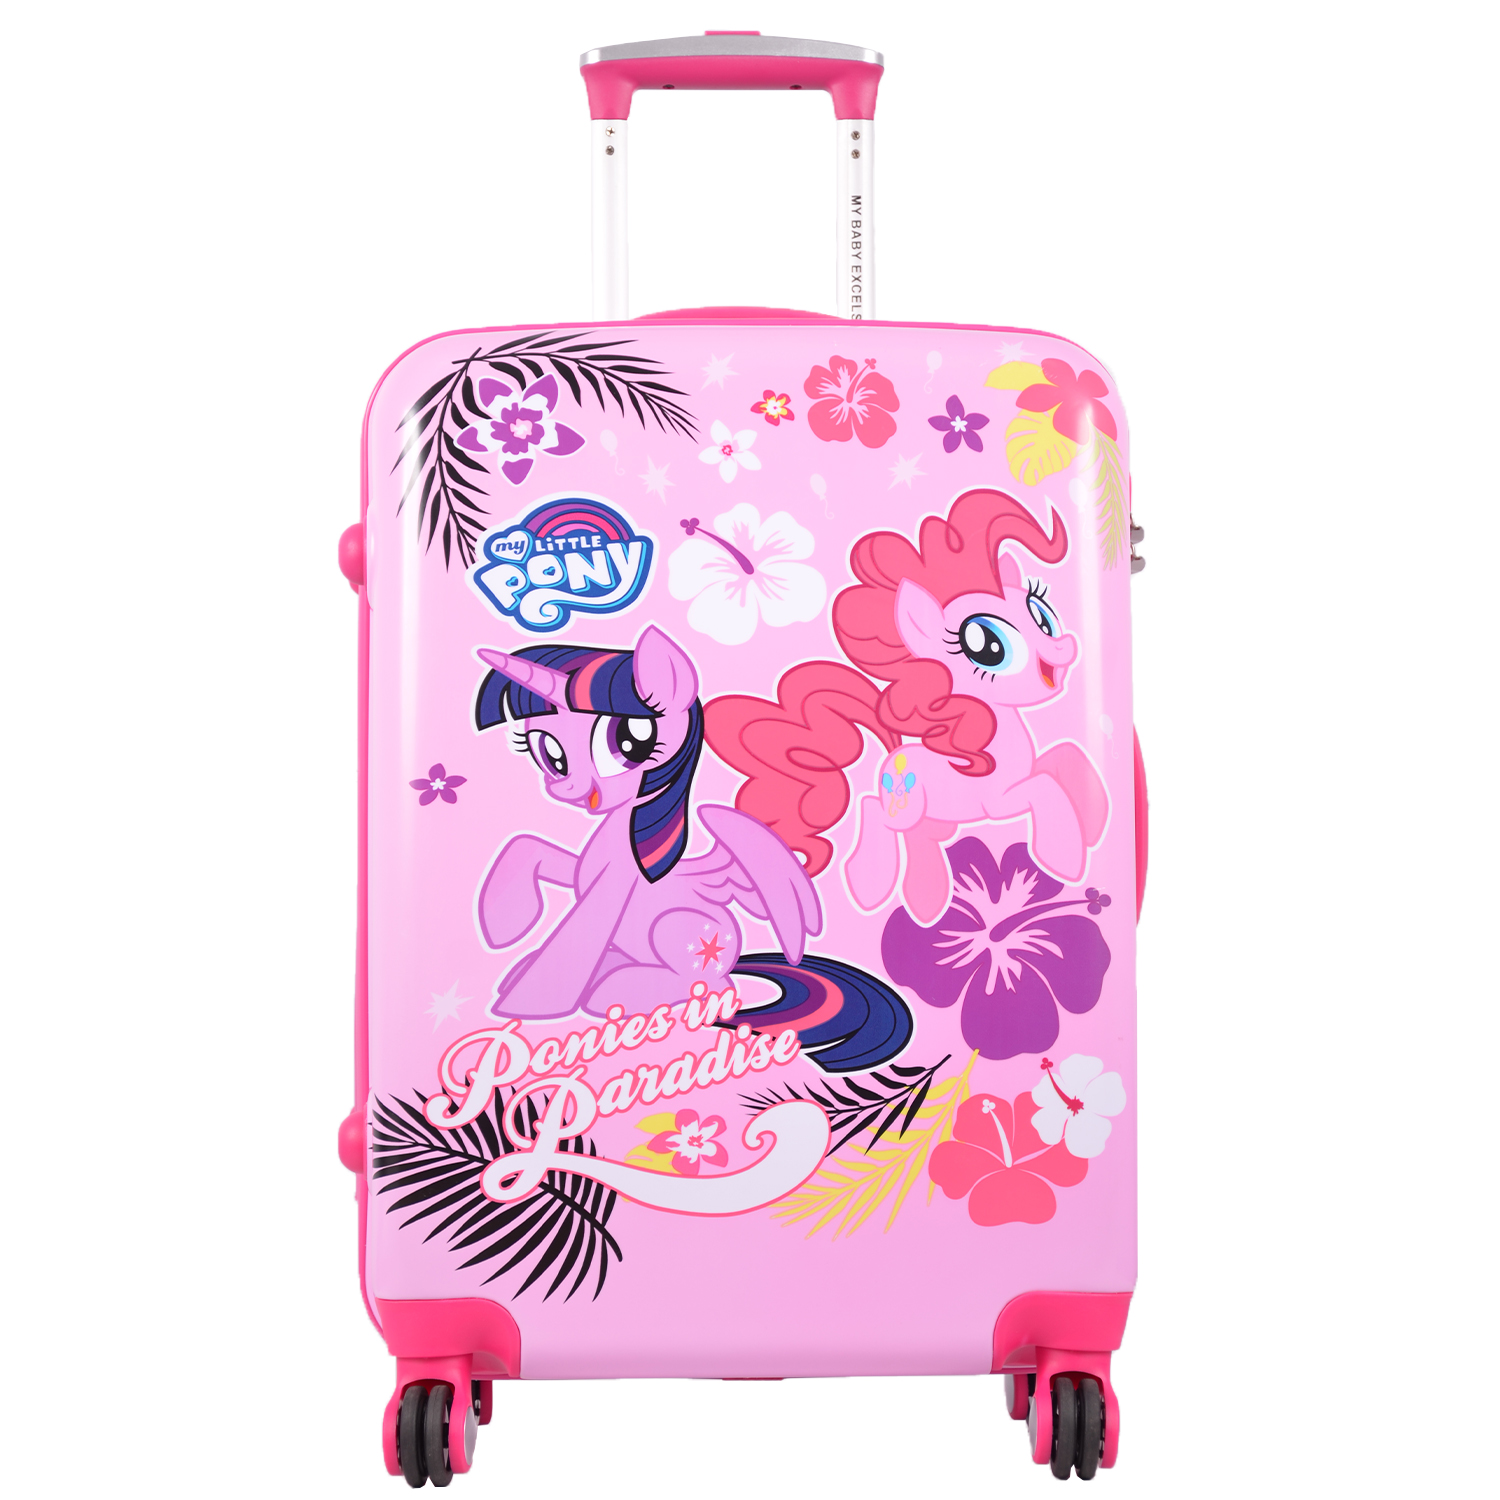 Details more than 78 luggage bags for travel super hot - in.cdgdbentre